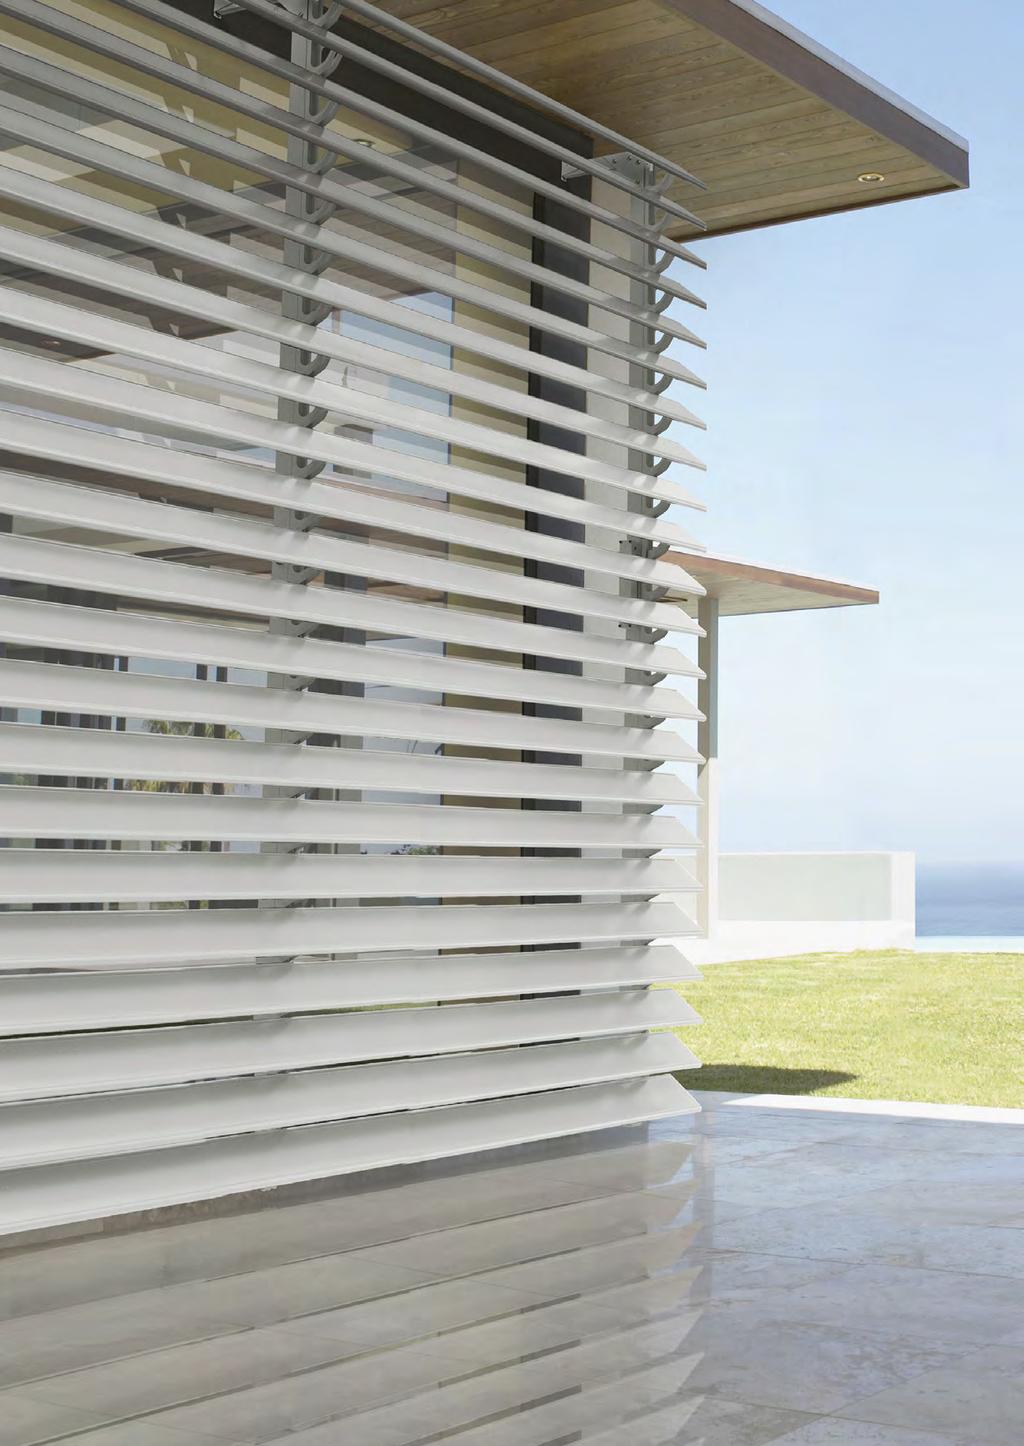 Louvre Awnings Luxaflex Louvre Awnings are extremely effective for providing privacy, light control and air flow for balconies and external windows.